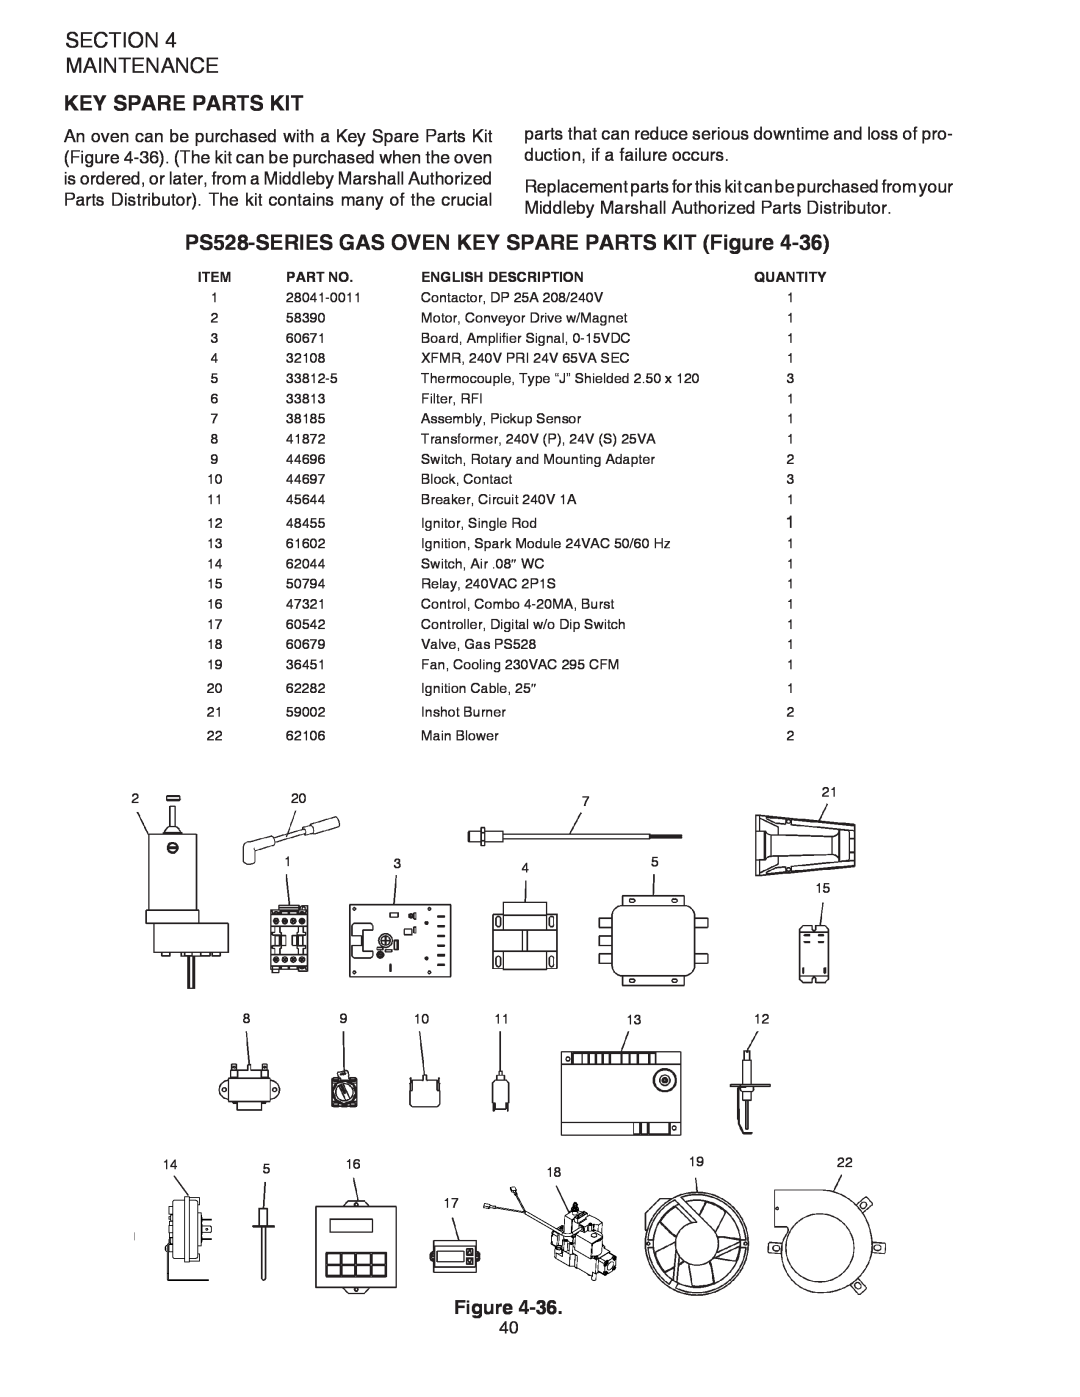 Middleby Marshall PS528G Key Spare Parts Kit, PS528-SERIESGAS OVEN KEY SPARE PARTS KIT Figure, Section Maintenance 